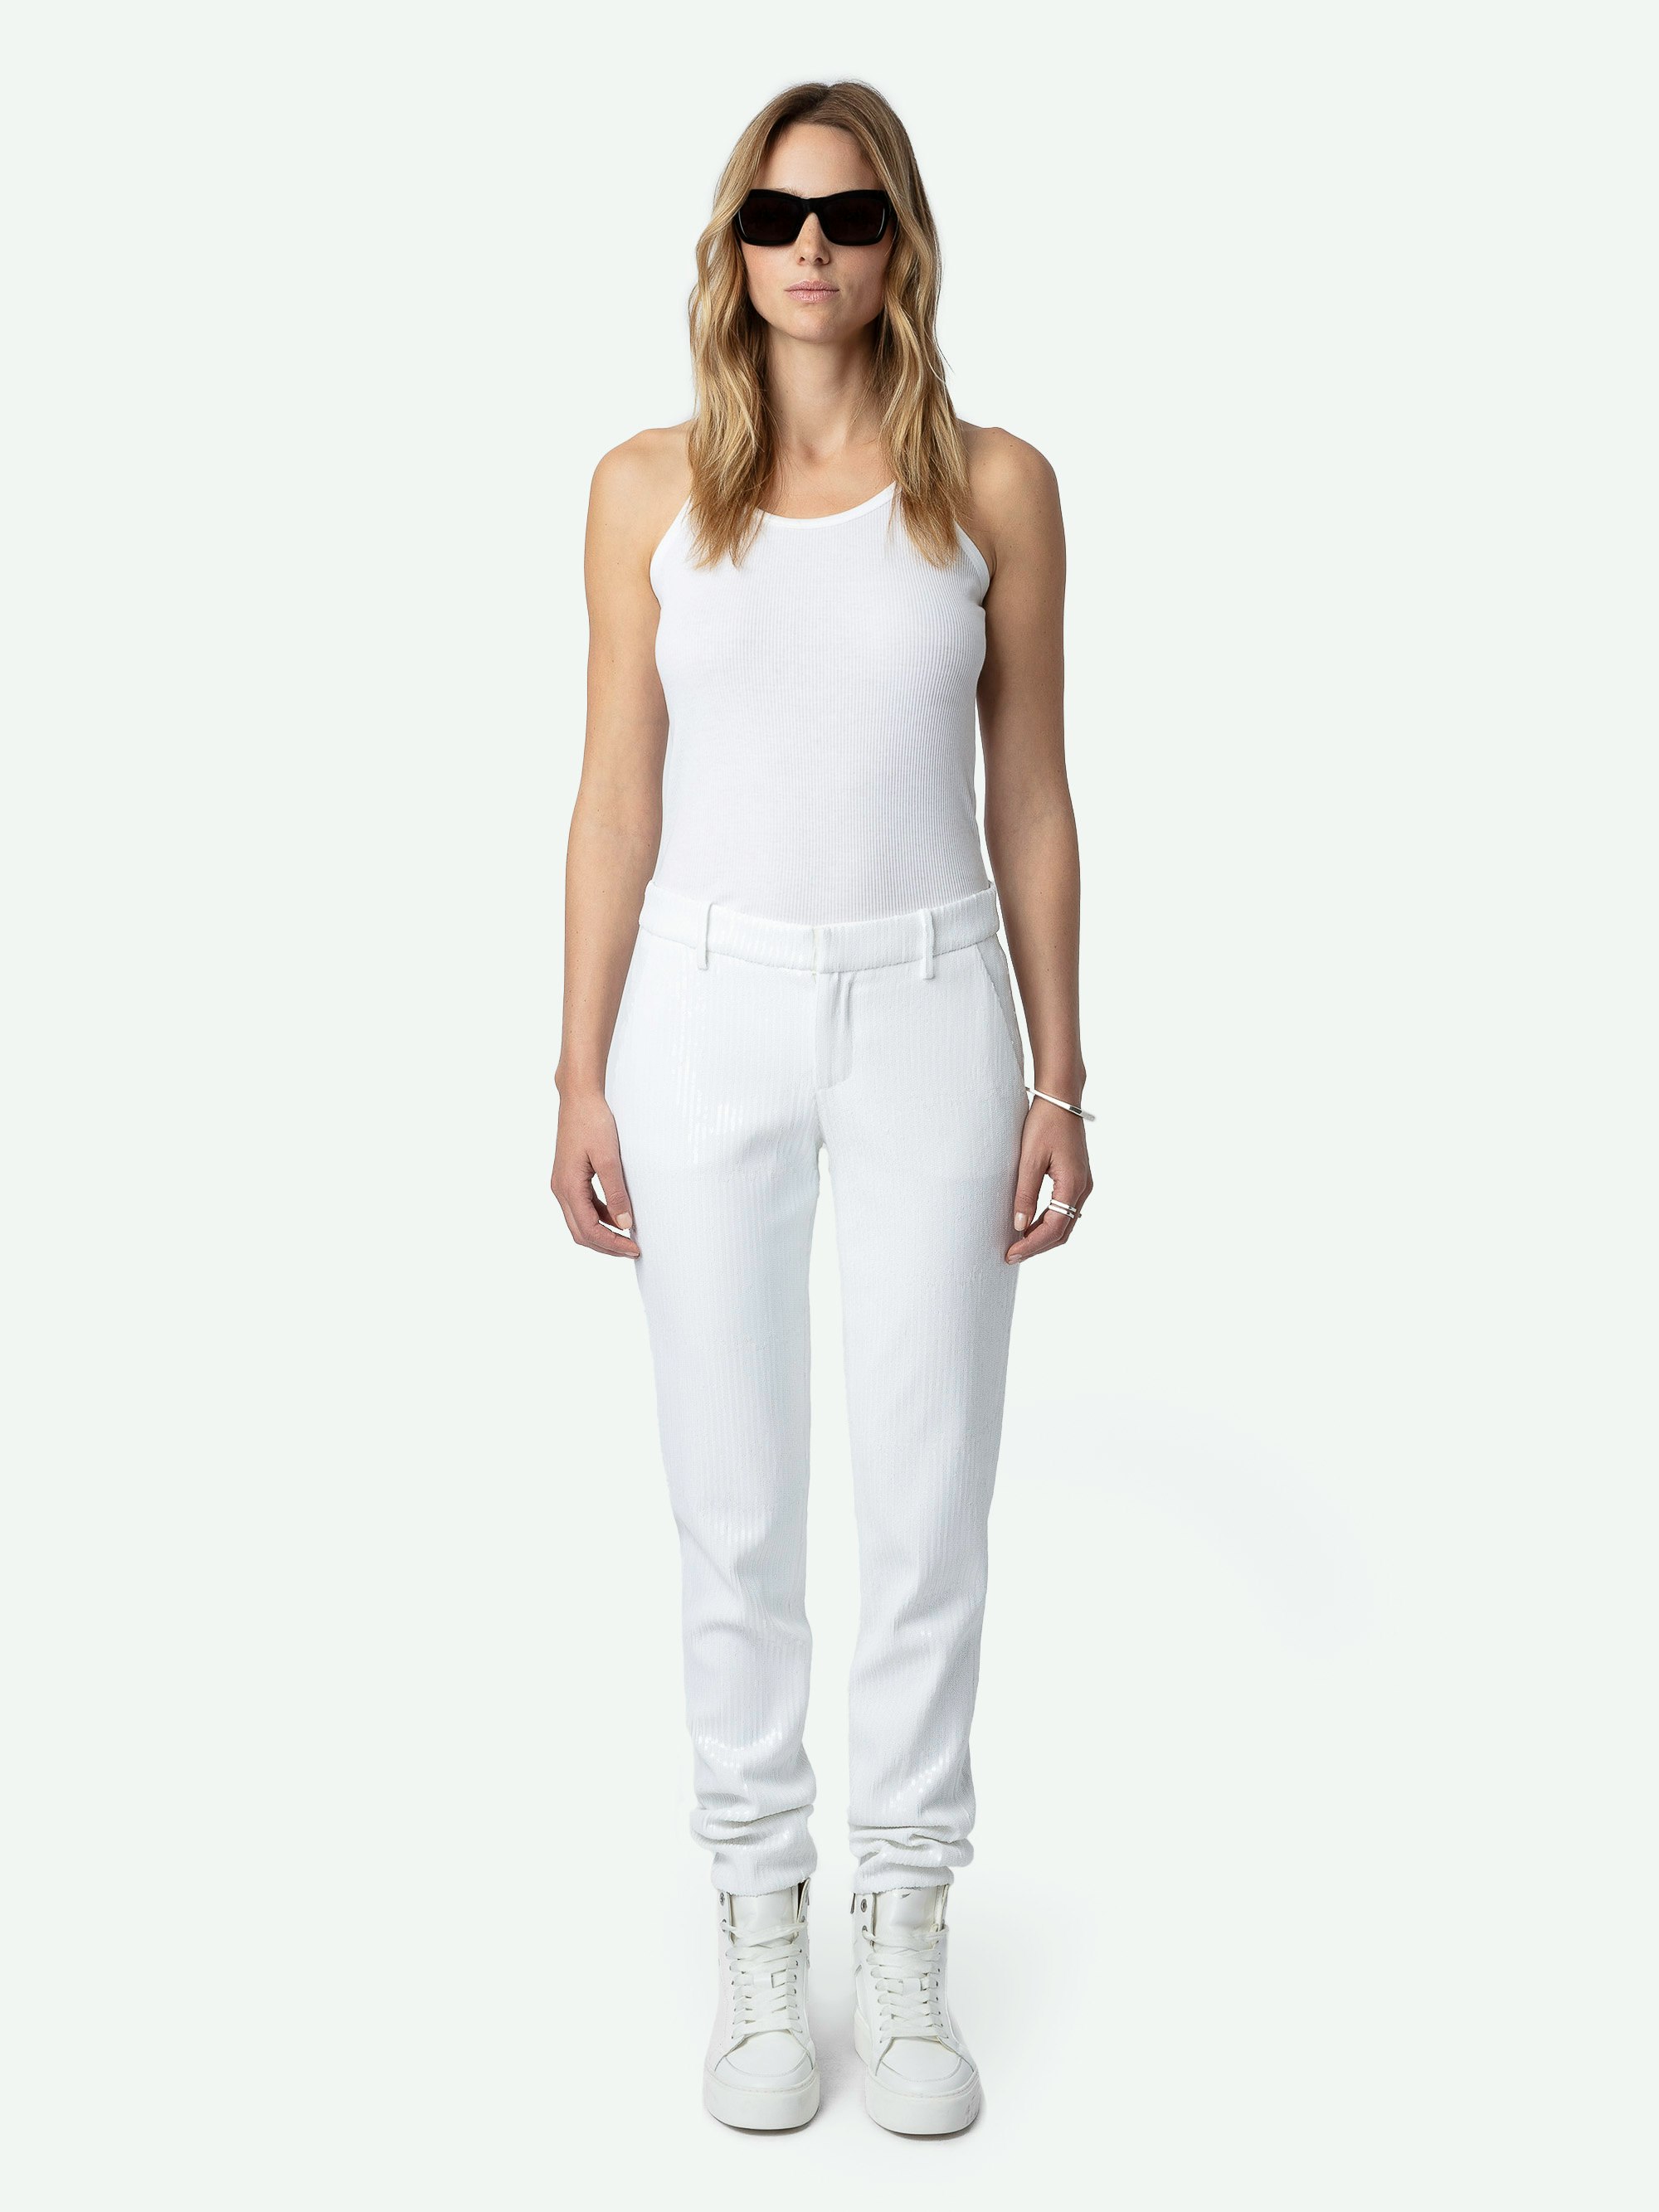 Prune Sequin Pants - White straight-leg suit pants with sequins and pockets.